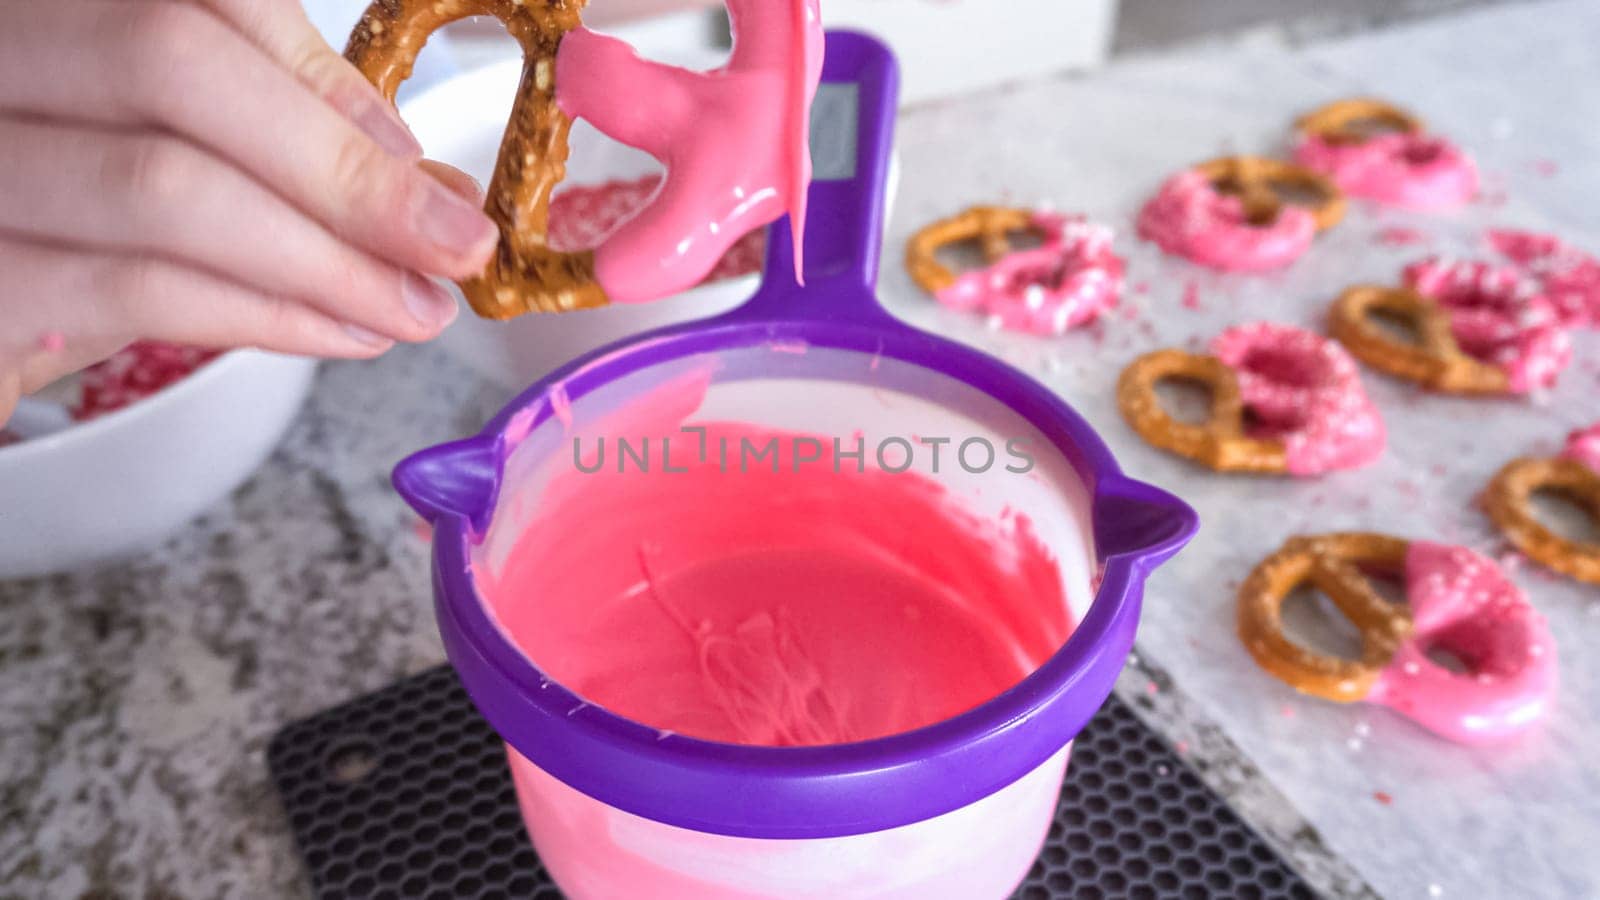 Homemade Gourmet: Delightful Pretzels Adorned with Pink Chocolate and Sprinkles by arinahabich